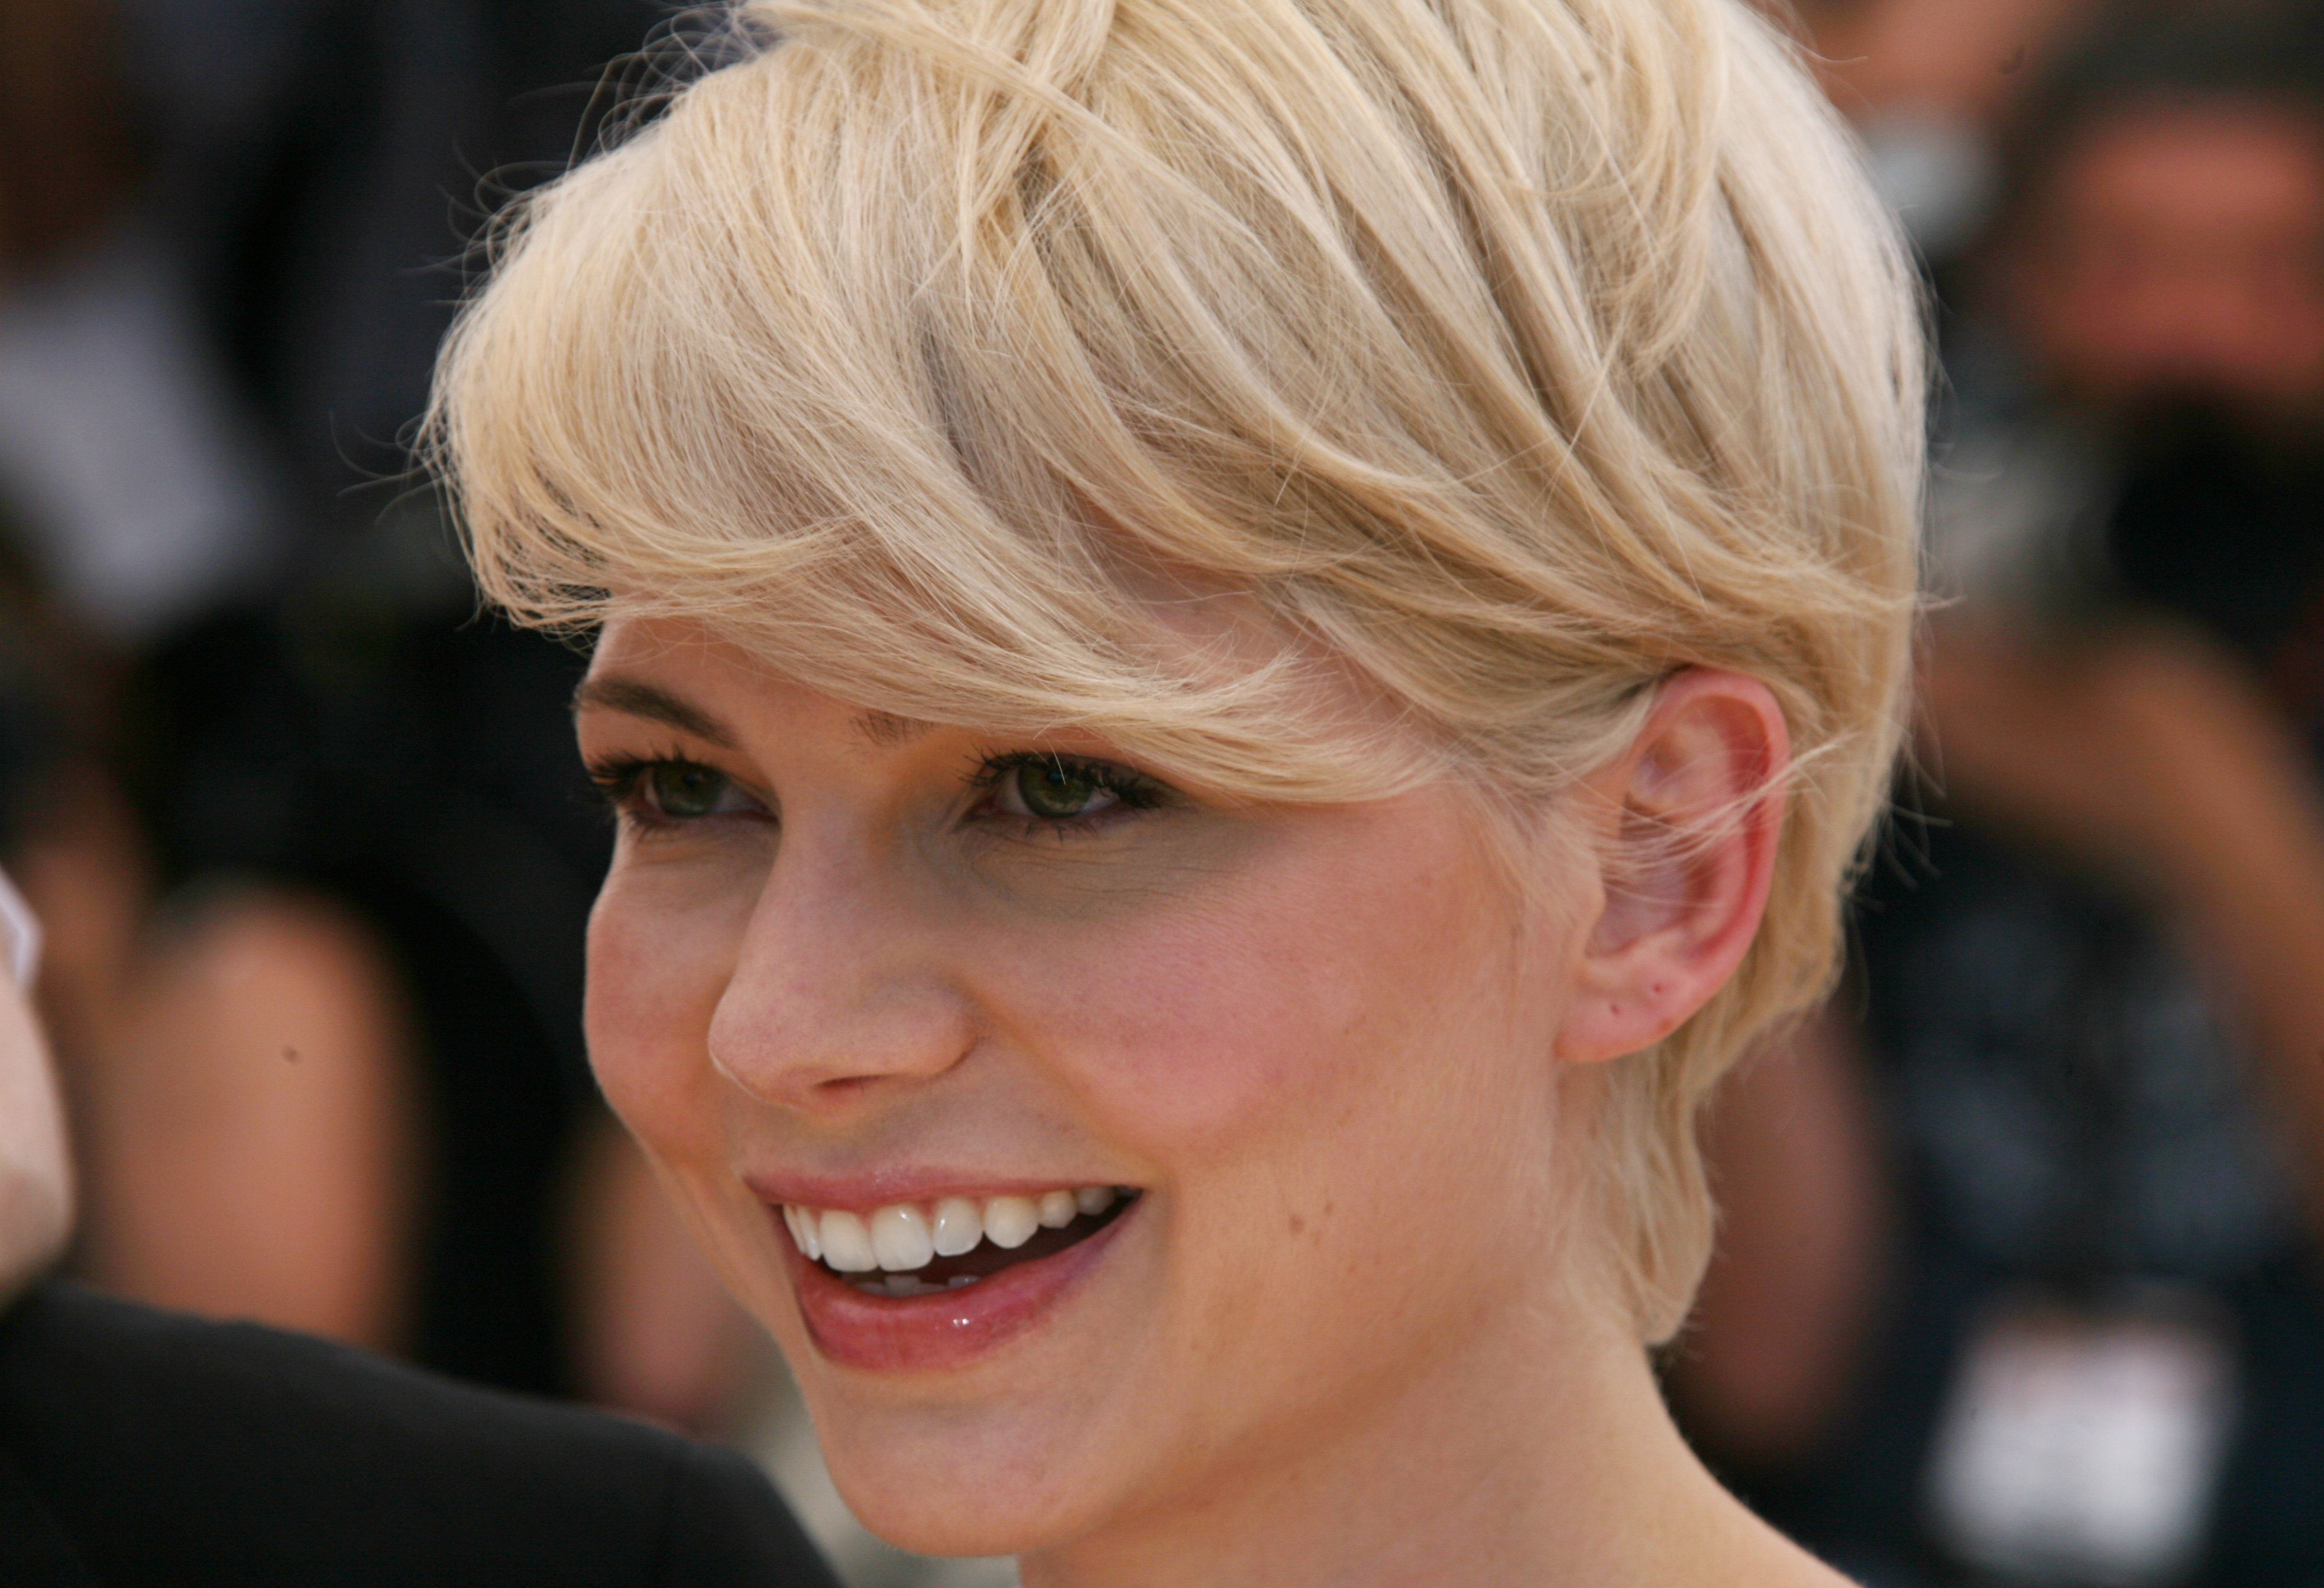 Michelle Williams(actress)